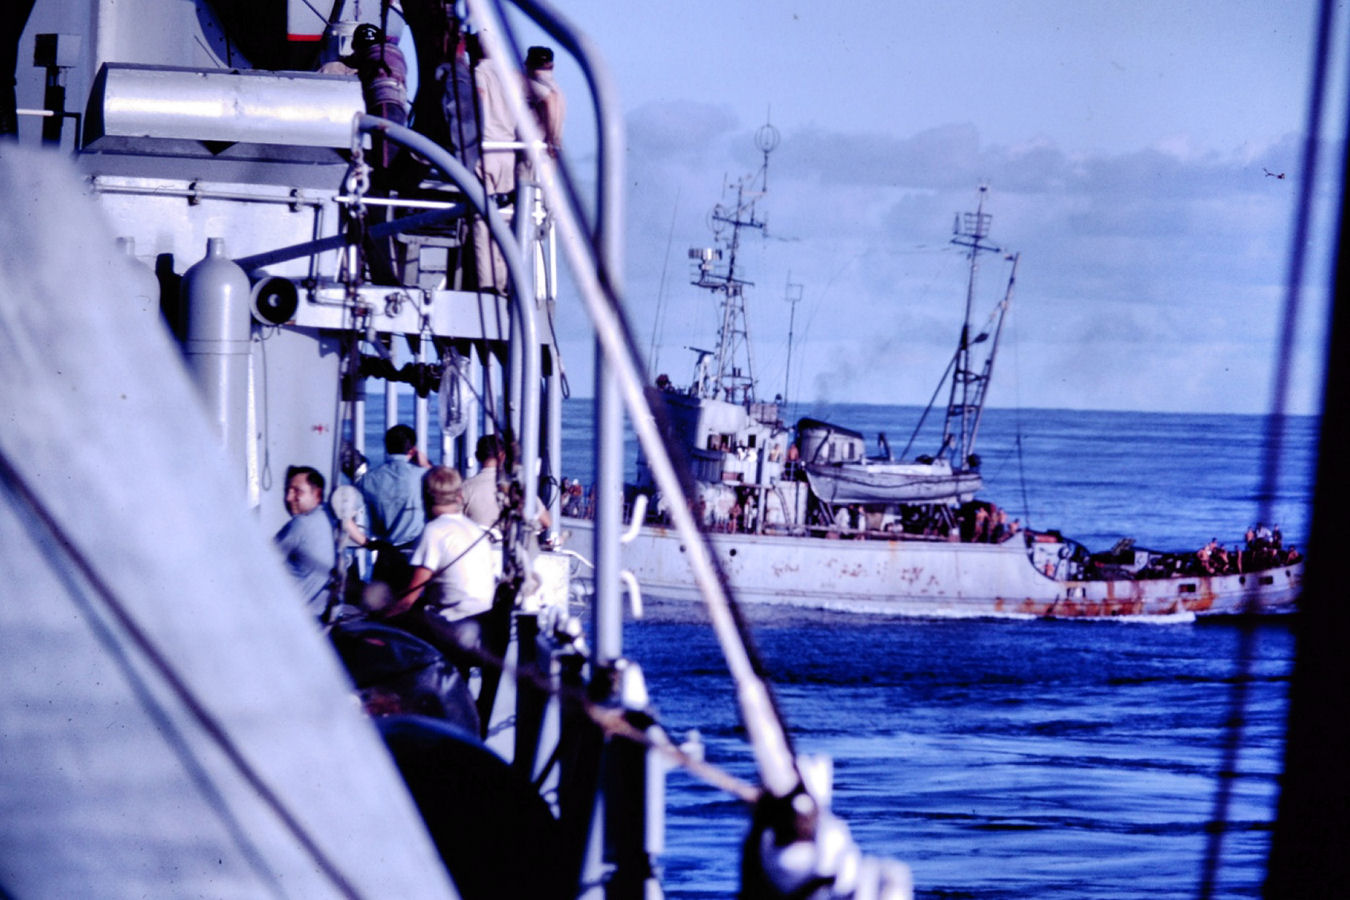 1971-Apollo15wait-another-Russian-Trawler-passing-astern.jpg